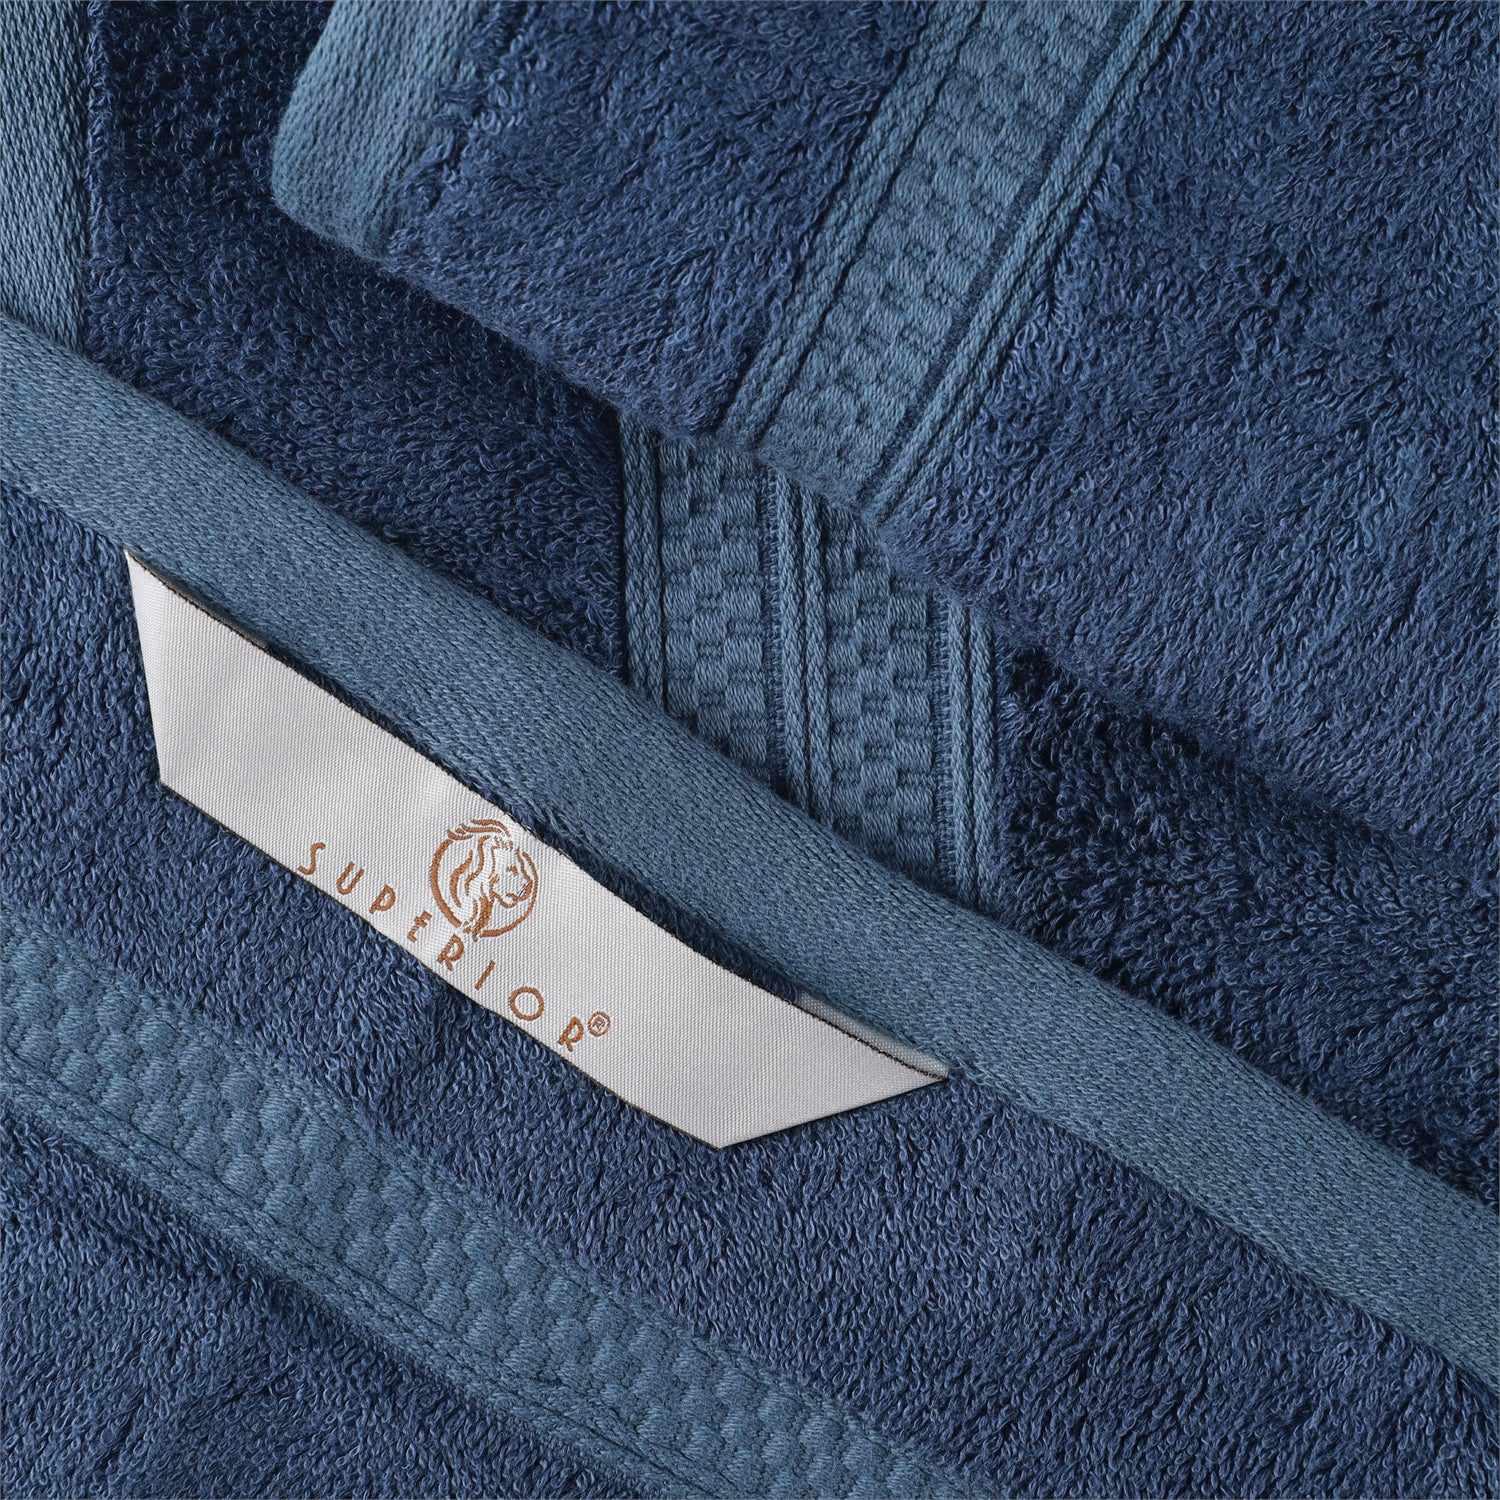  Ultra-Soft Hypoallergenic Rayon from Bamboo Cotton Blend Assorted Bath Towel Set -  River Blue